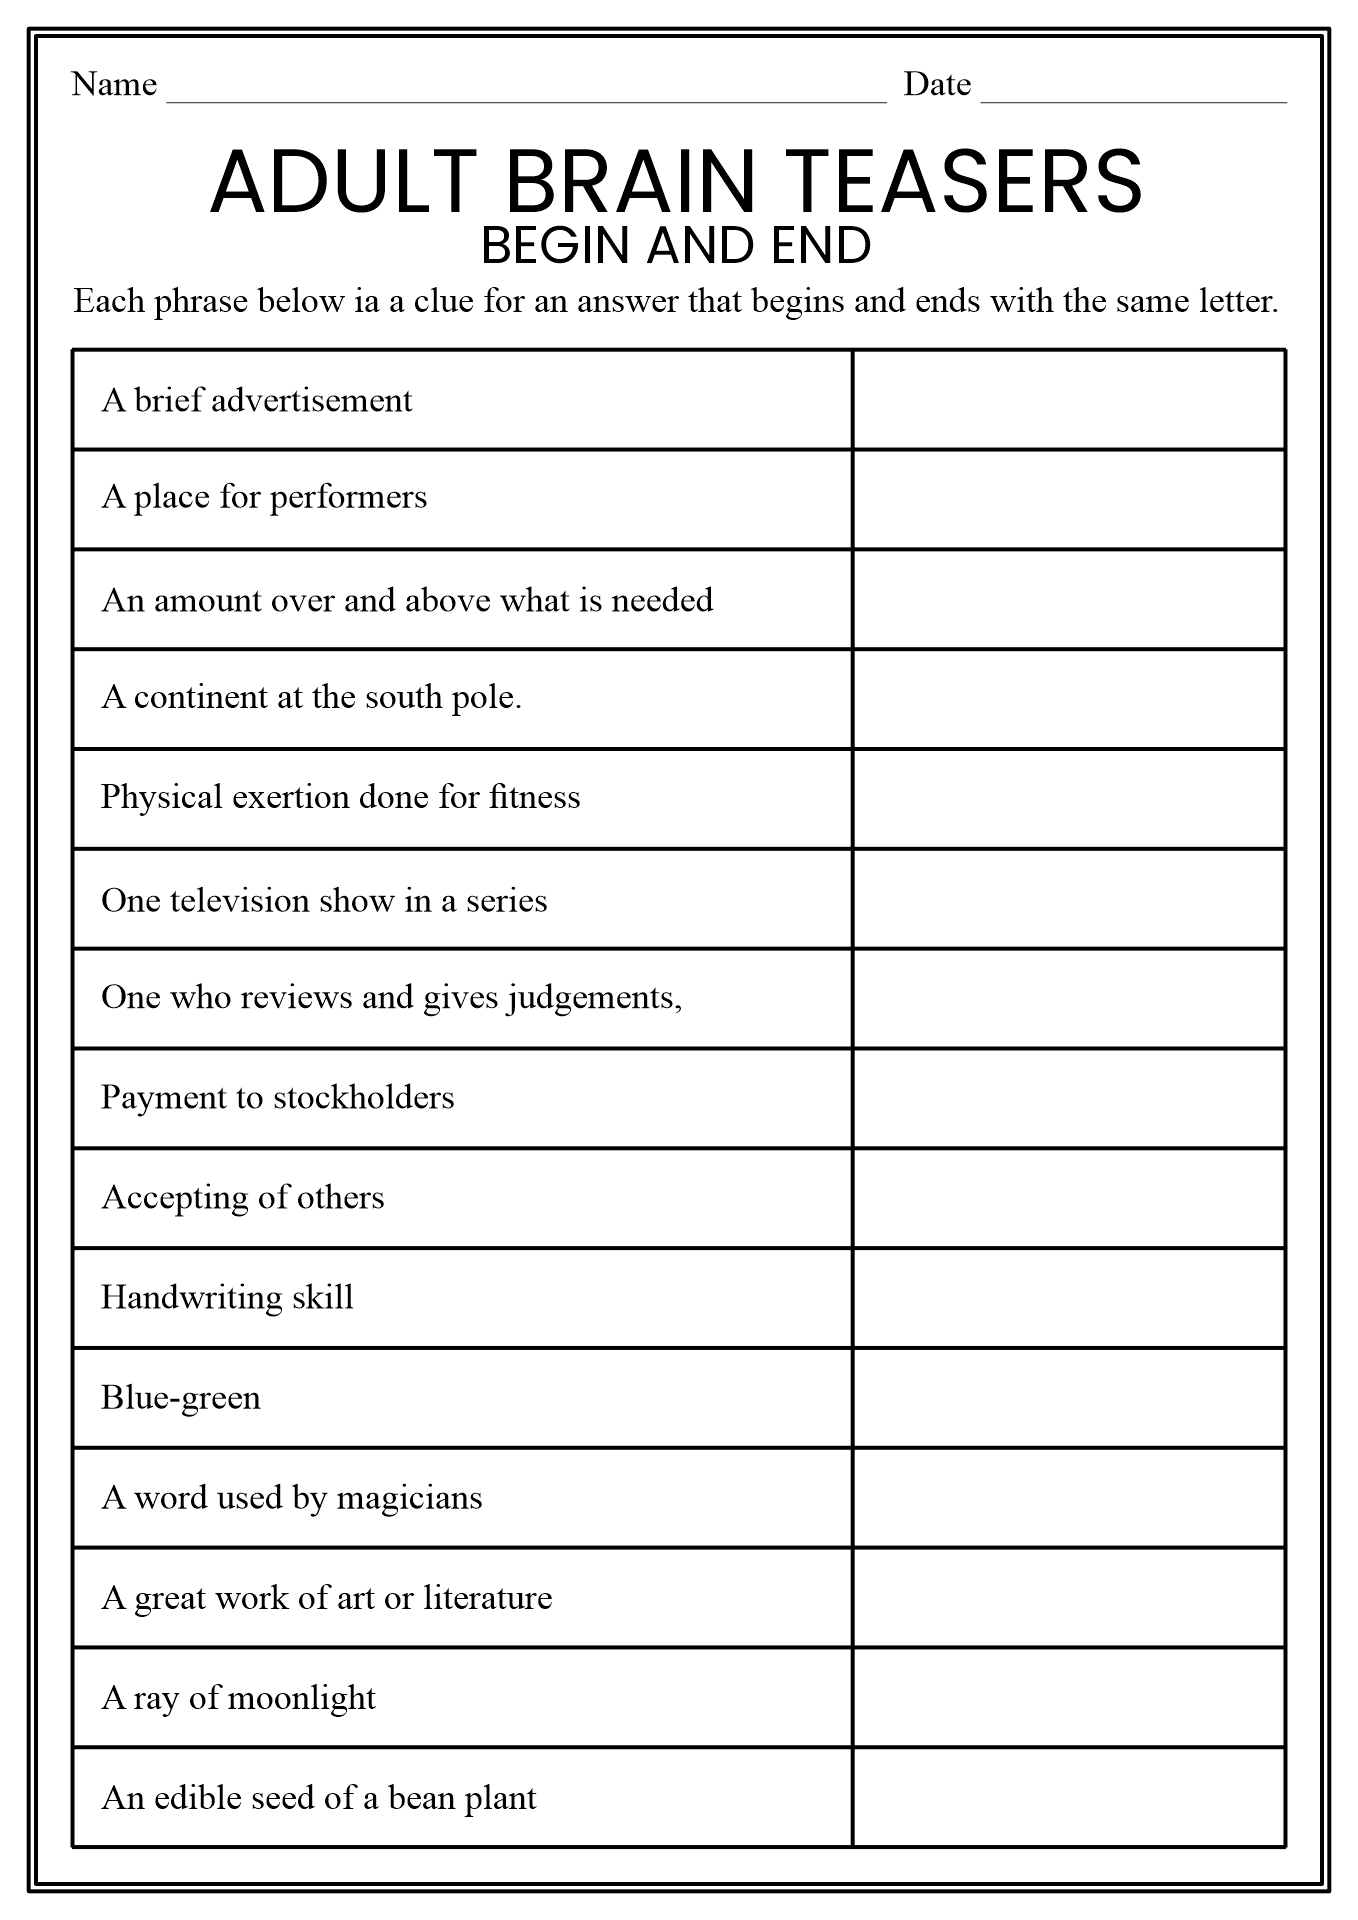 12 Best Images of Riddles And Brain Teasers Worksheets - Printable